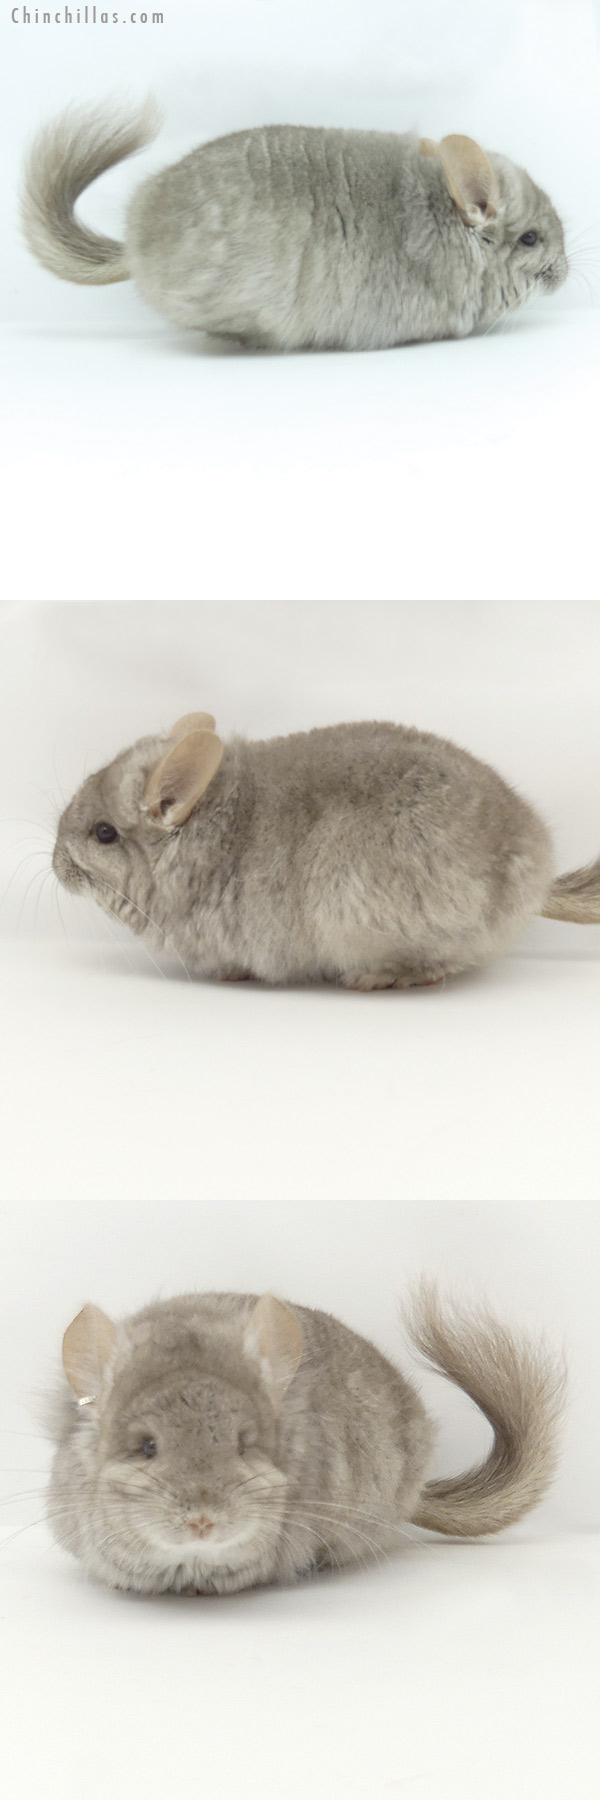 Chinchilla or related item offered for sale or export on Chinchillas.com - 20143 Beige  Royal Persian Angora Female Chinchilla